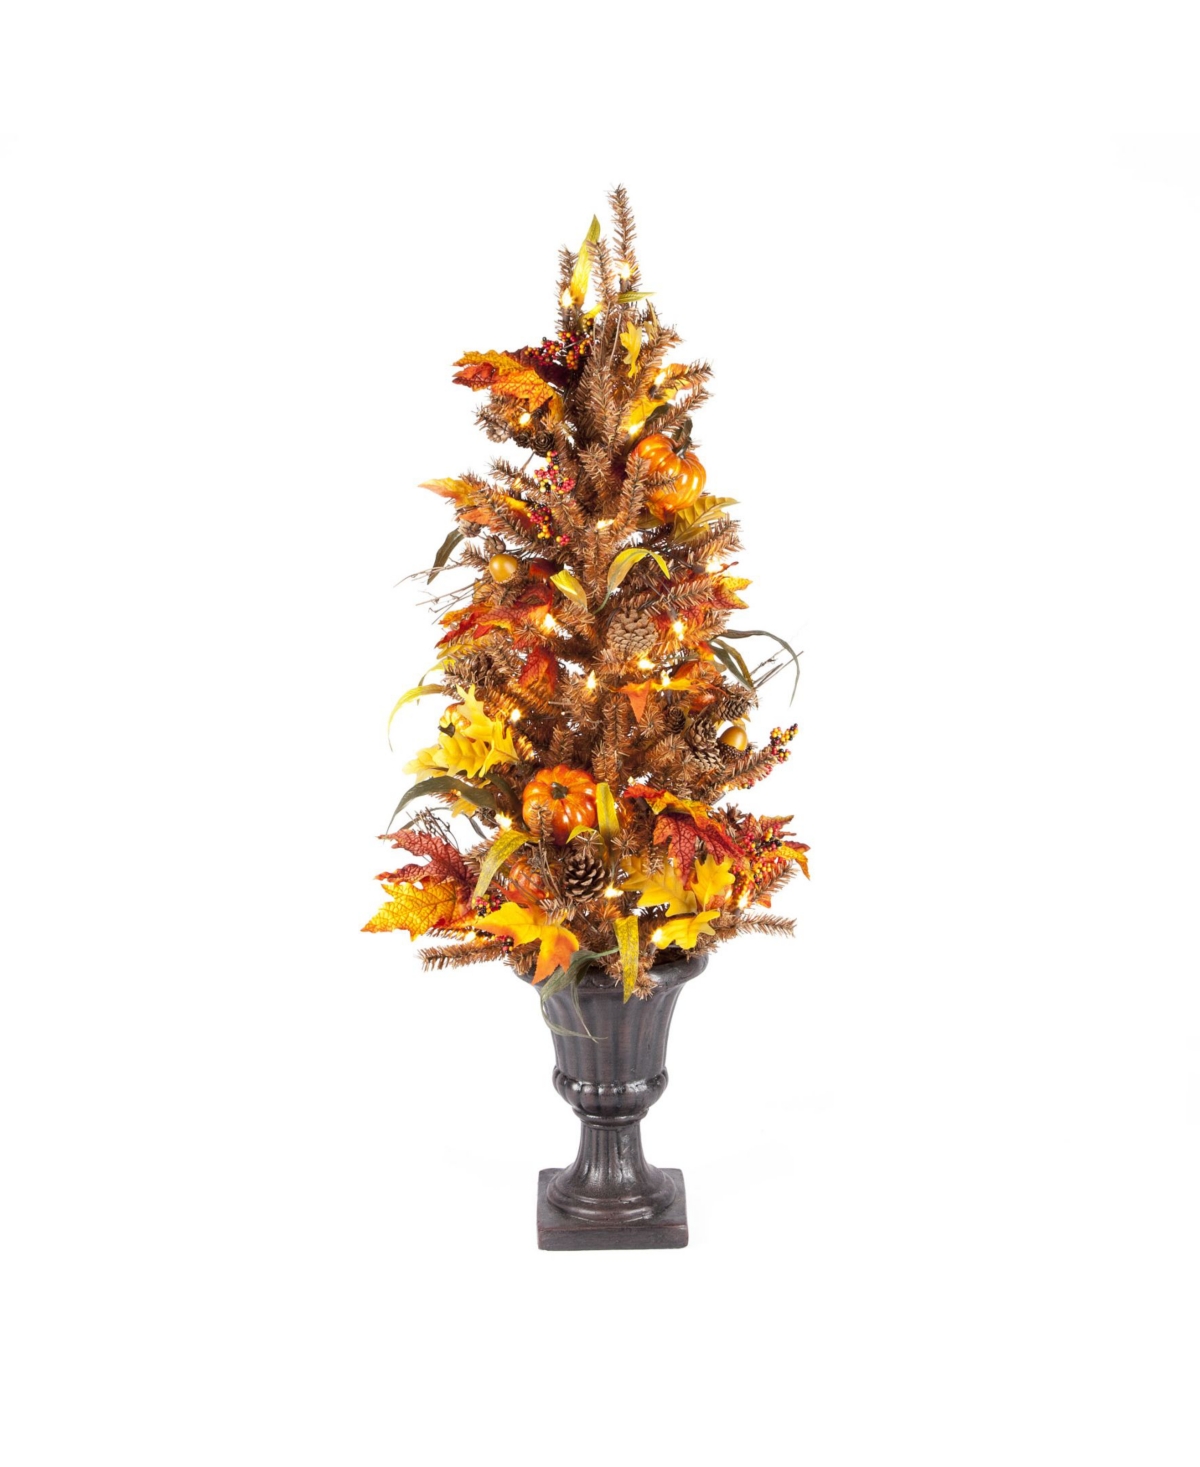 46" Pre-Lit Fall or Harvest Tree with Pumpkins, Pinecones, and Berries with 50 Lights - Orange